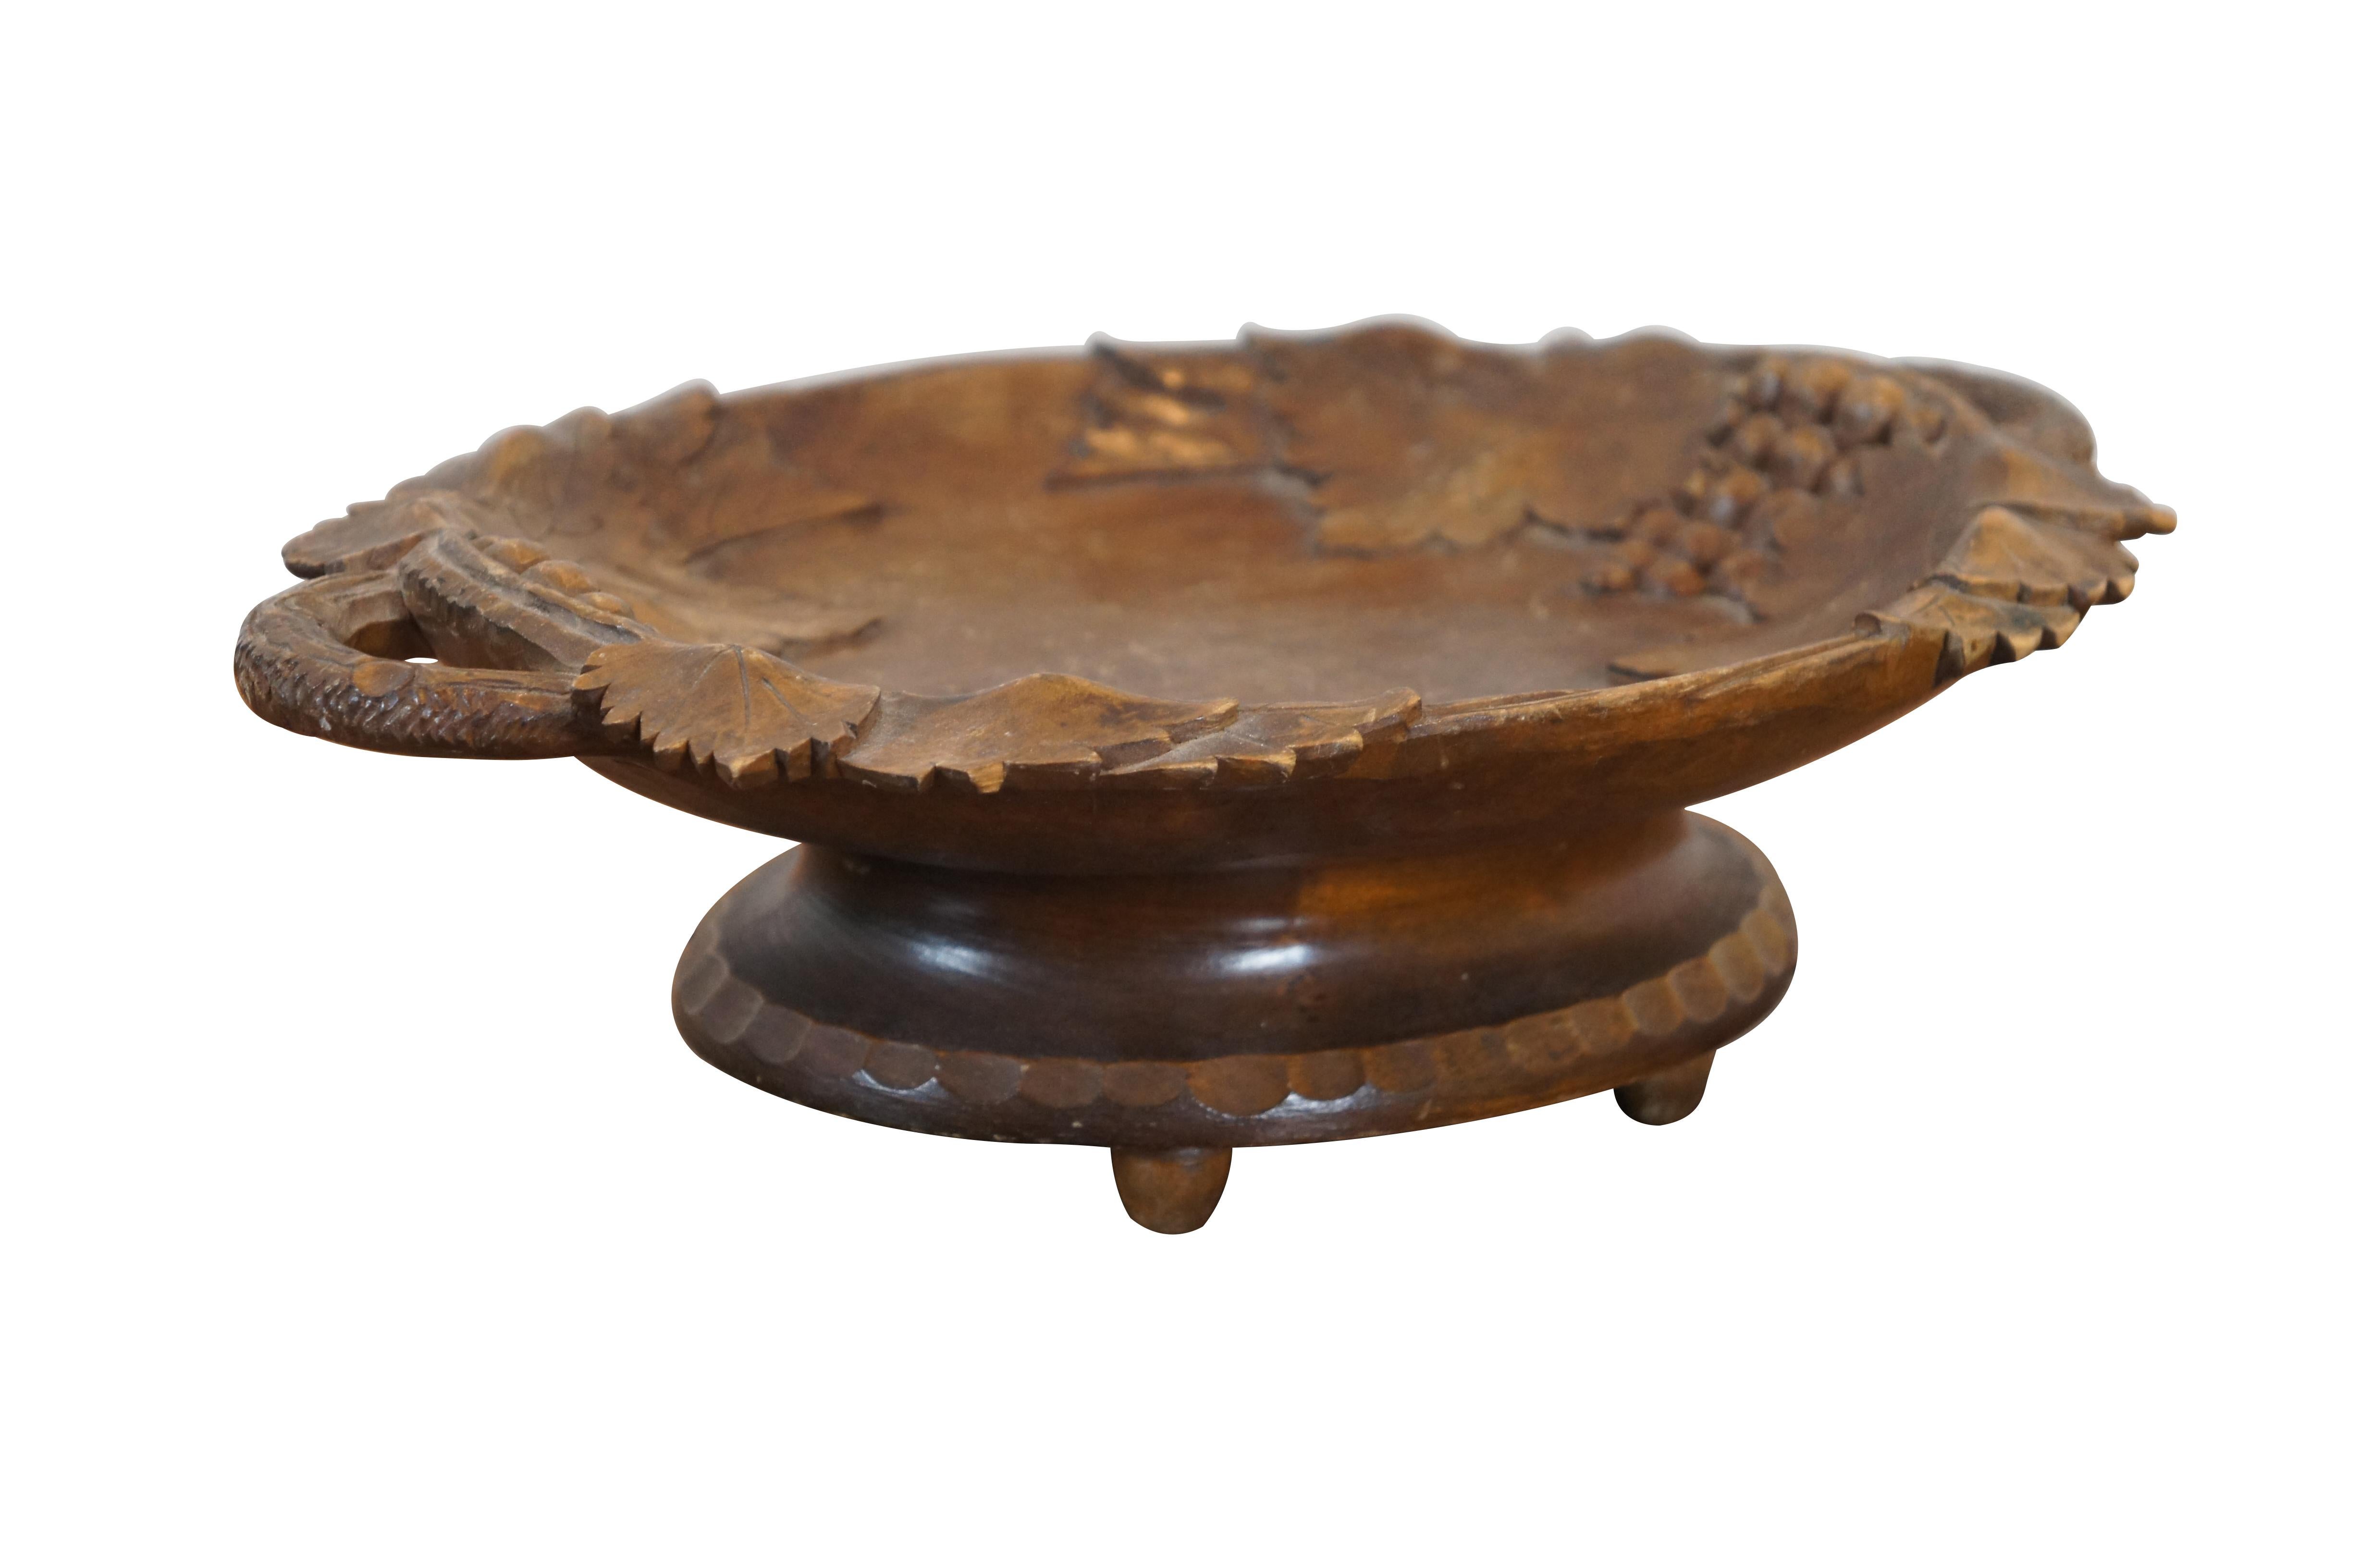 Vintage Albert Schild Interlaken carved wood footed bowl / compote / bon bon dish. Carved in a folk art / Black Forest style with grape vine, fruit and leaves with branch shaped handles. Supported on four bun feet. Plays Happy Birthday and Tea for